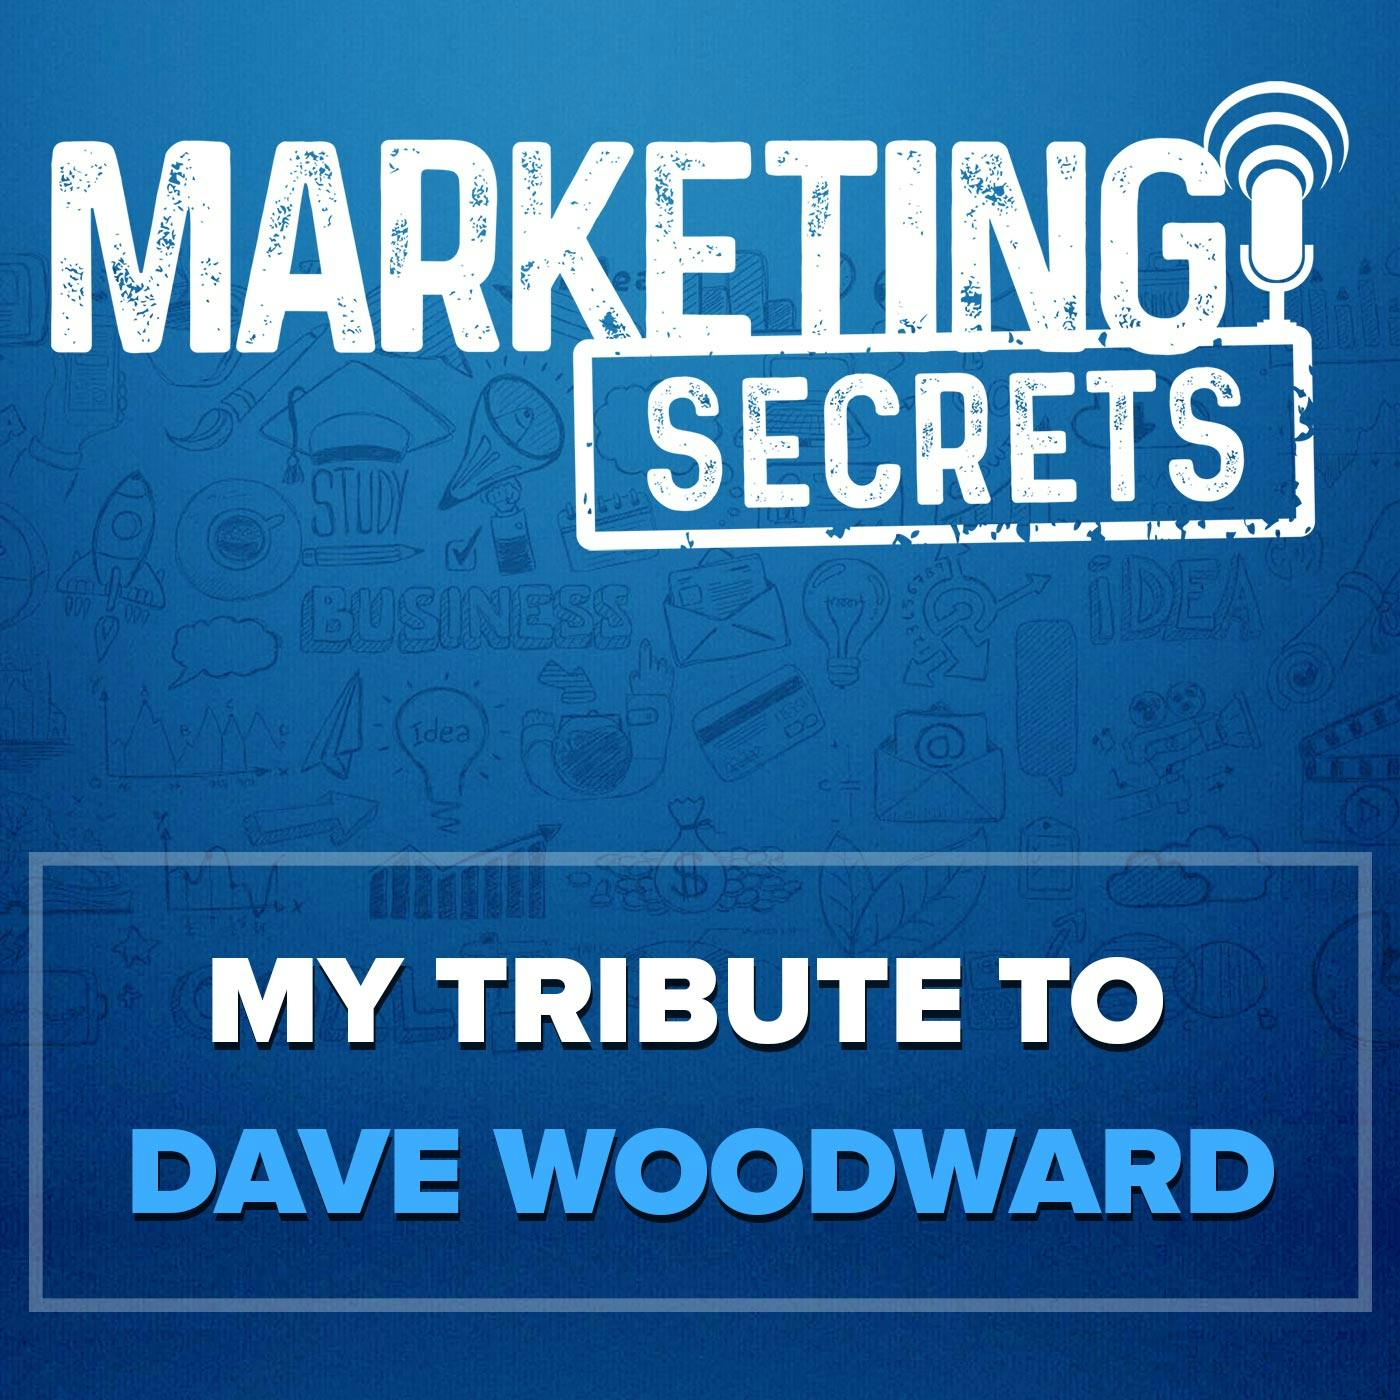 My Tribute to Dave Woodward